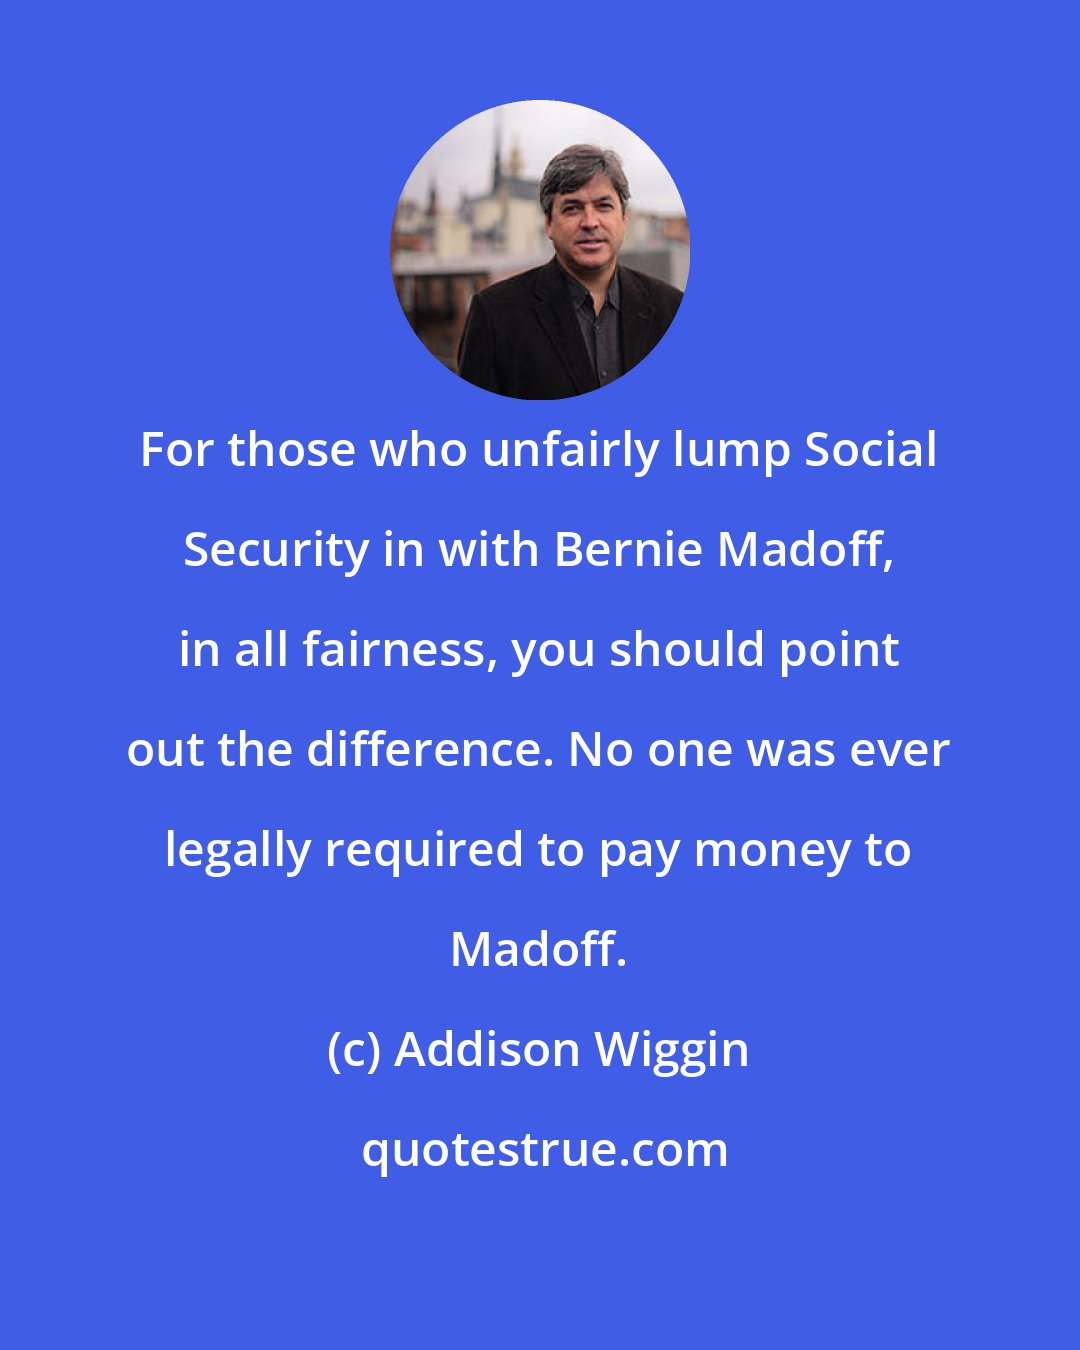 Addison Wiggin: For those who unfairly lump Social Security in with Bernie Madoff, in all fairness, you should point out the difference. No one was ever legally required to pay money to Madoff.